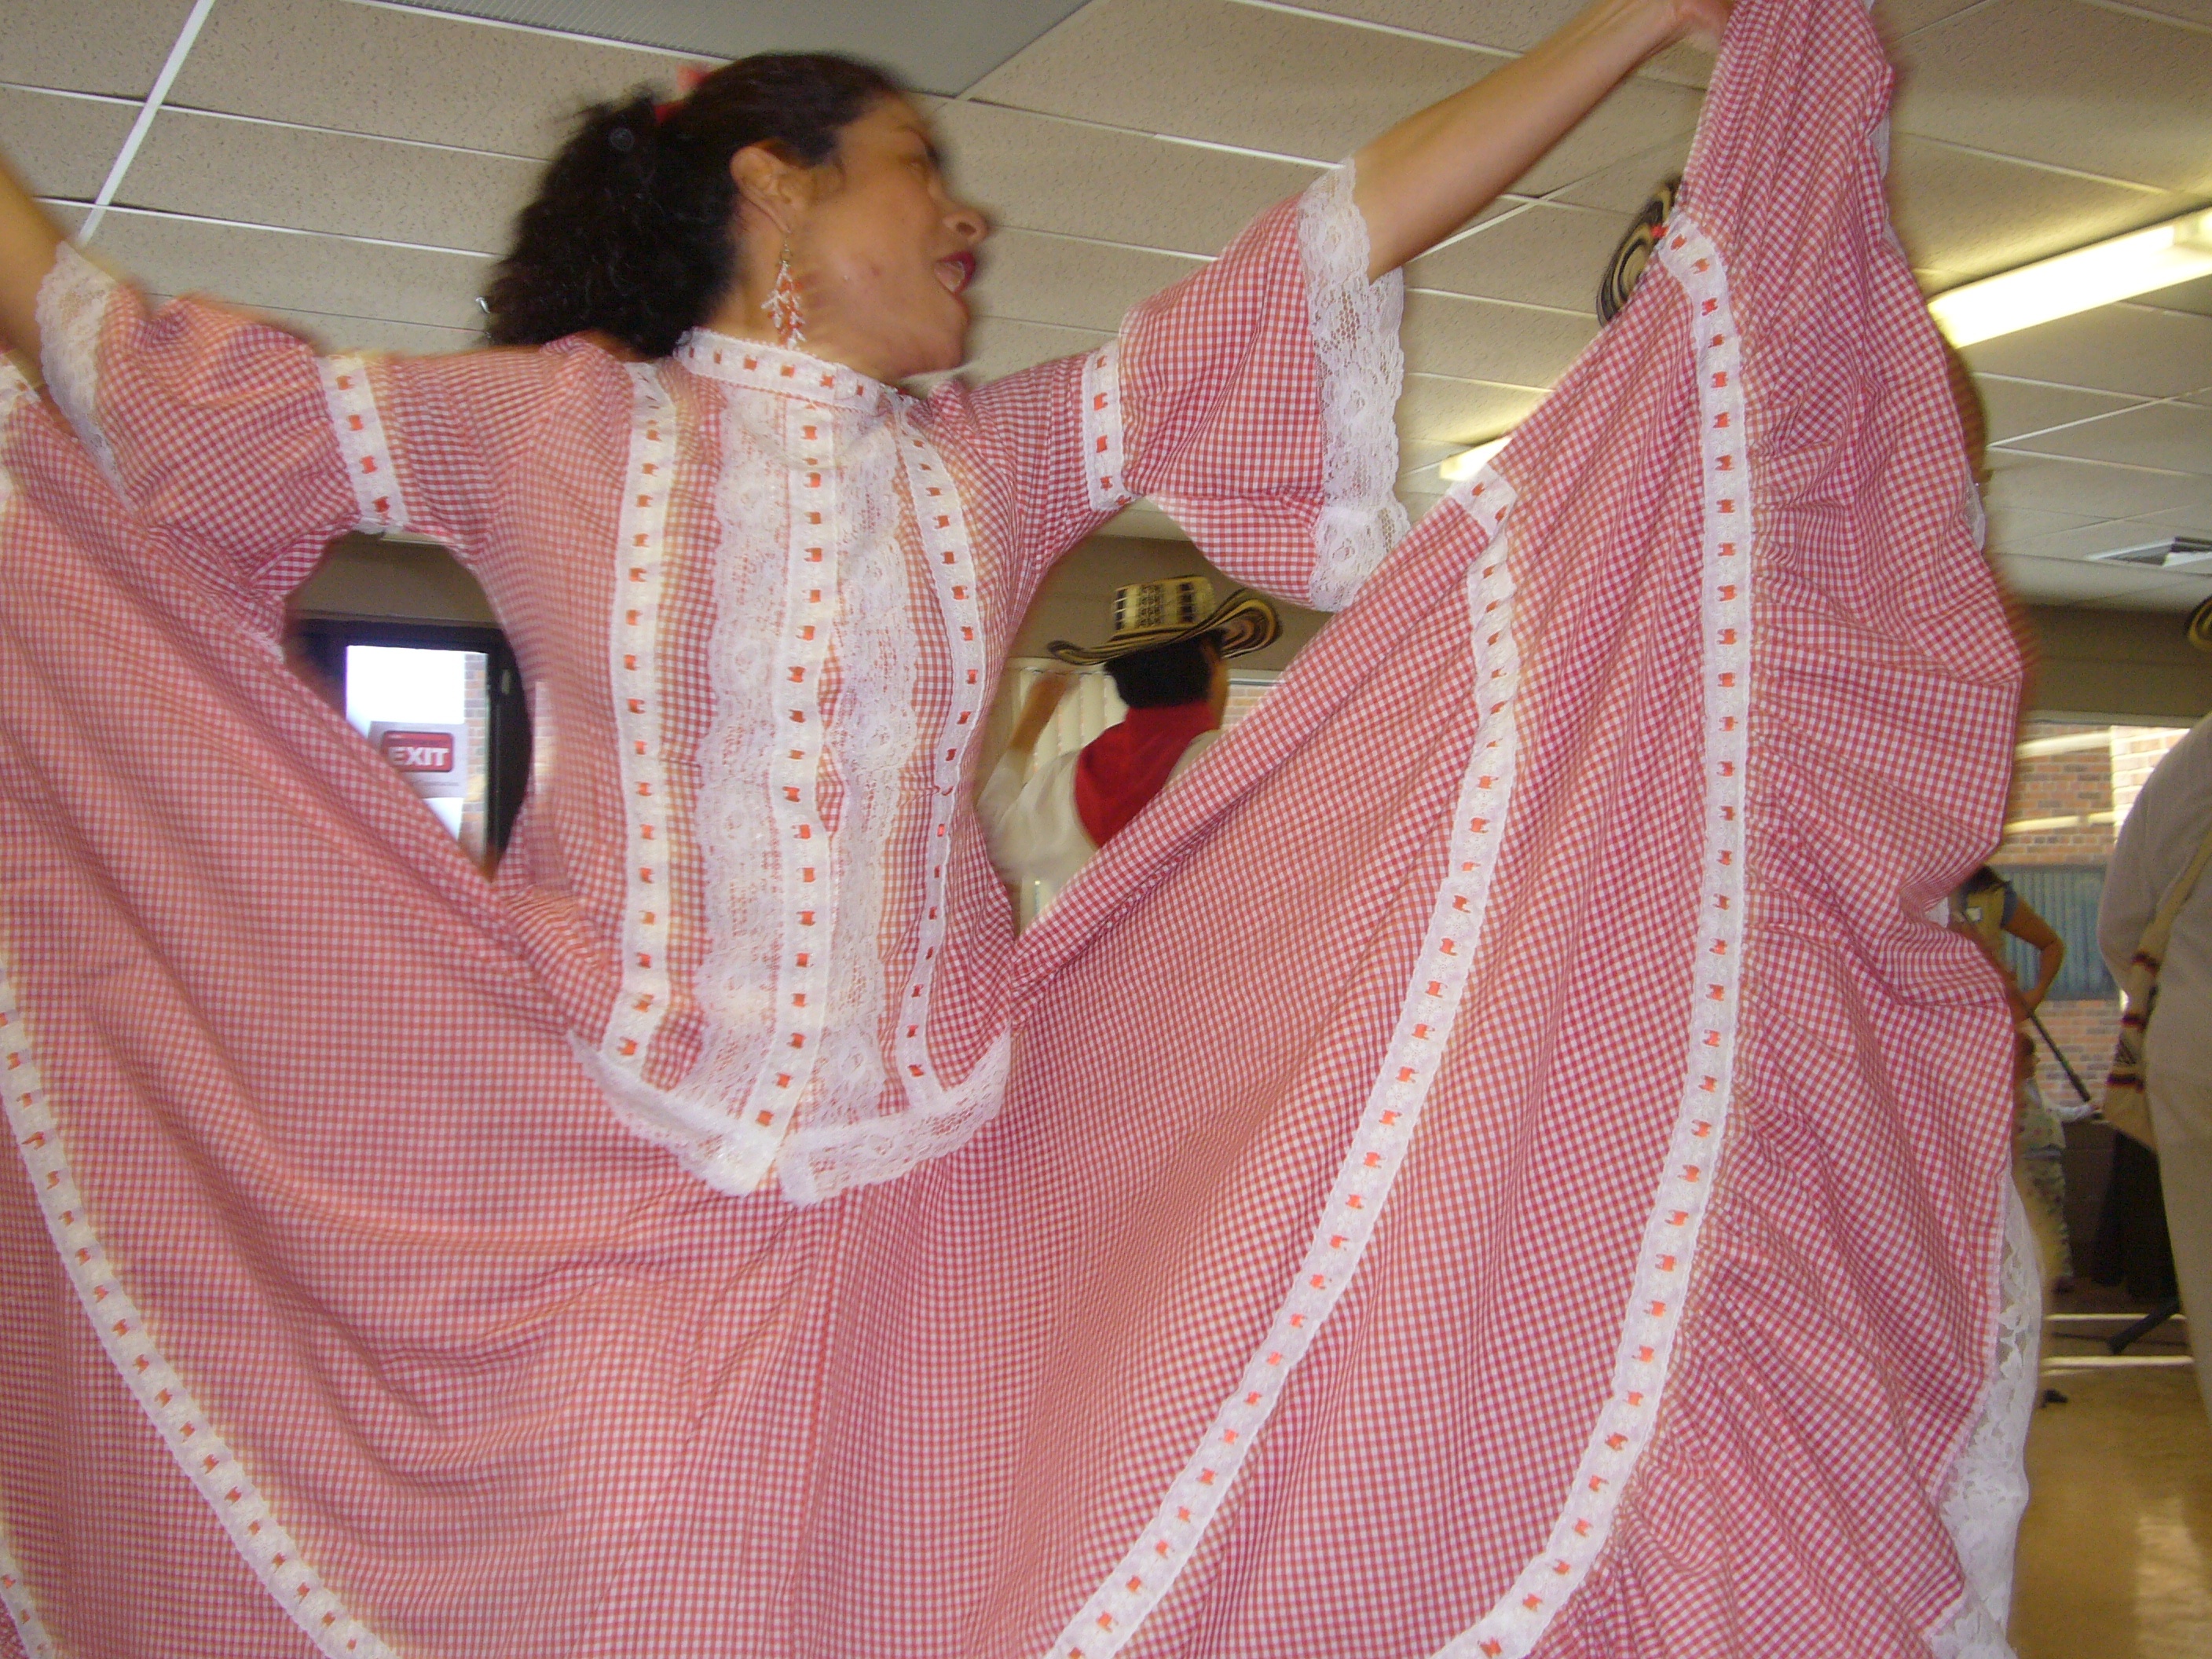 Woman in a pink folkloric dress dancing with a raised swirling skirt in a festive indoor environment.